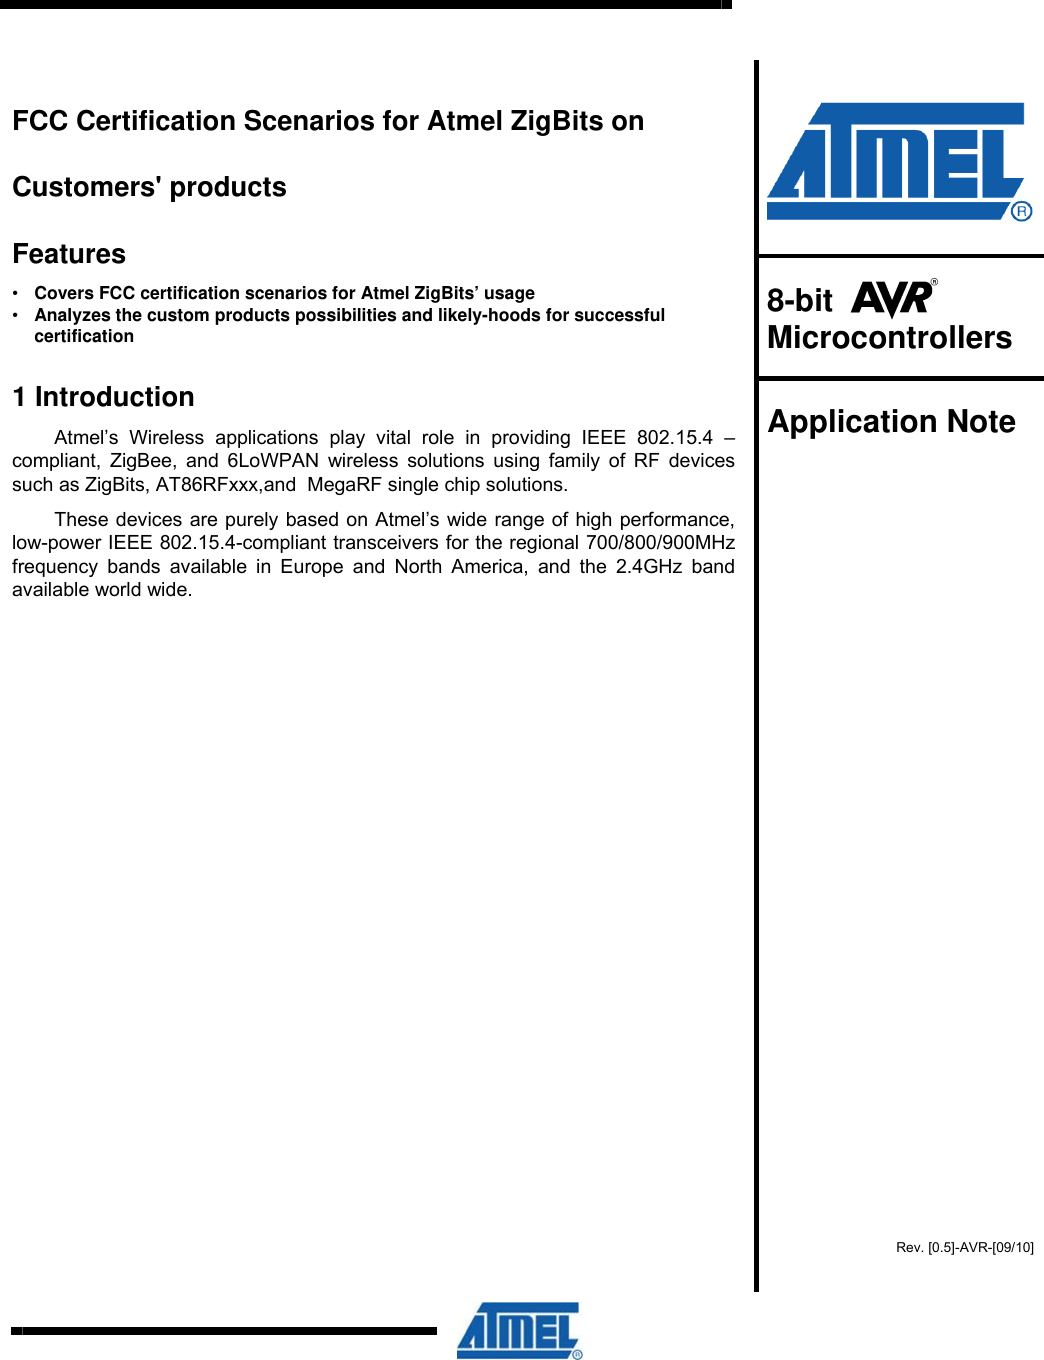     FCC Certification Scenarios for Atmel ZigBits on  Customers&apos; products  Features •  Covers FCC certification scenarios for Atmel ZigBits’ usage   •  Analyzes the custom products possibilities and likely-hoods for successful  certification 1 Introduction Atmel’s Wireless applications play vital role in providing IEEE 802.15.4 – compliant, ZigBee, and 6LoWPAN wireless solutions using family of RF devices such as ZigBits, AT86RFxxx,and  MegaRF single chip solutions. These devices are purely based on Atmel’s wide range of high performance, low-power IEEE 802.15.4-compliant transceivers for the regional 700/800/900MHz frequency bands available in Europe and North America, and the 2.4GHz band available world wide.    8-bit    Microcontrollers  Application Note    Rev. [0.5]-AVR-[09/10] 